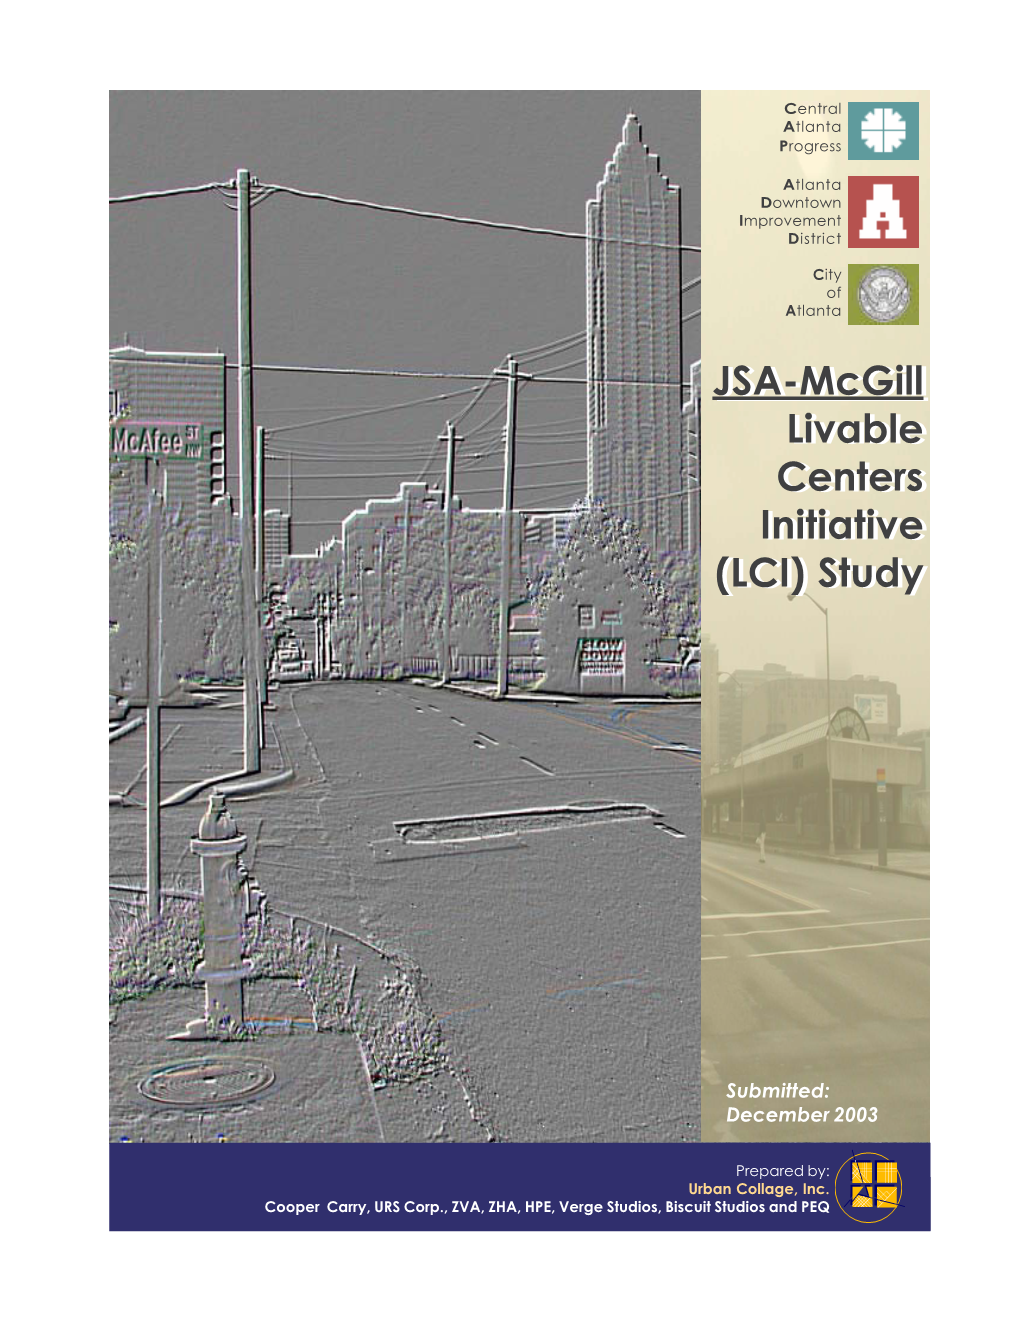 JSA-Mcgill Livable Centers Initiative (LCI) Plan Addresses Each of the 10 Study LCI Program Requirements Developed by the Atlanta Regional Commission